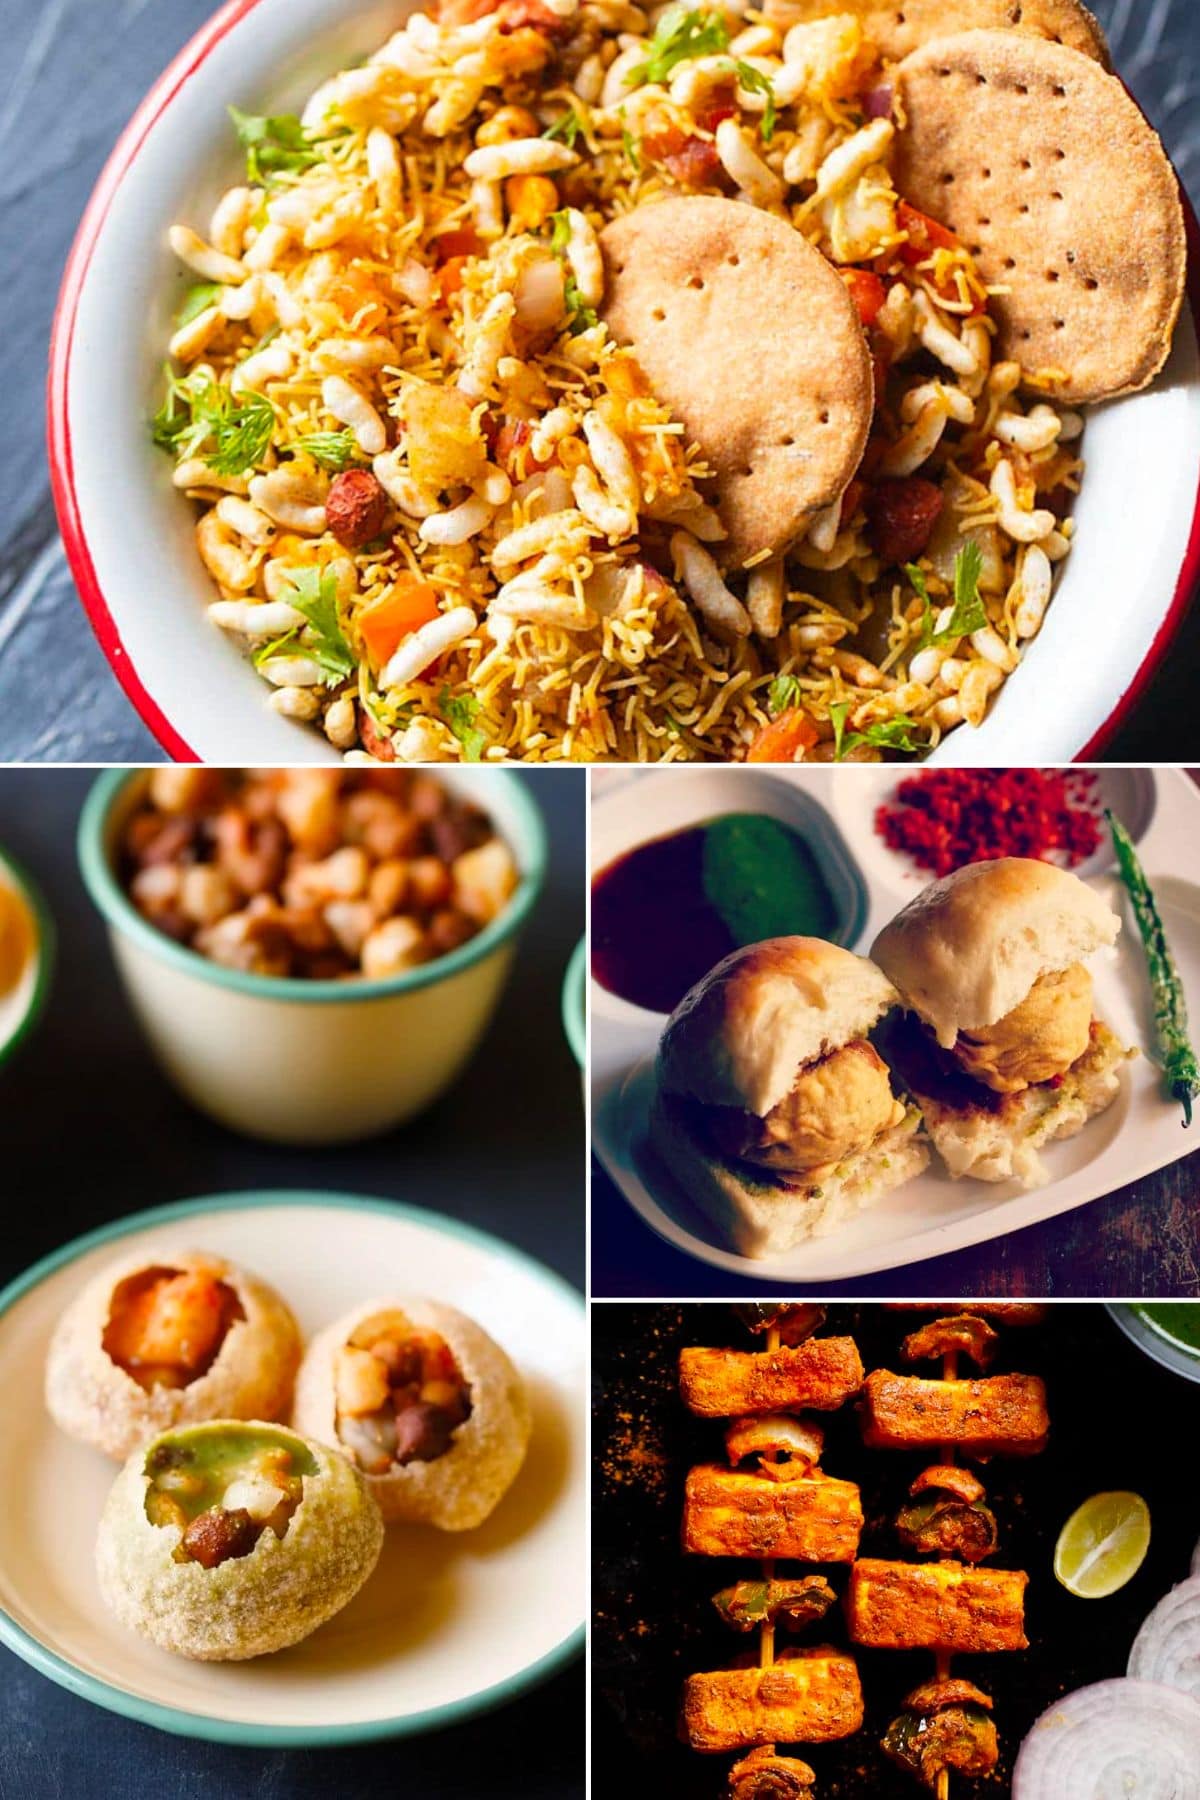 7 Best Indian Snacks on  2021